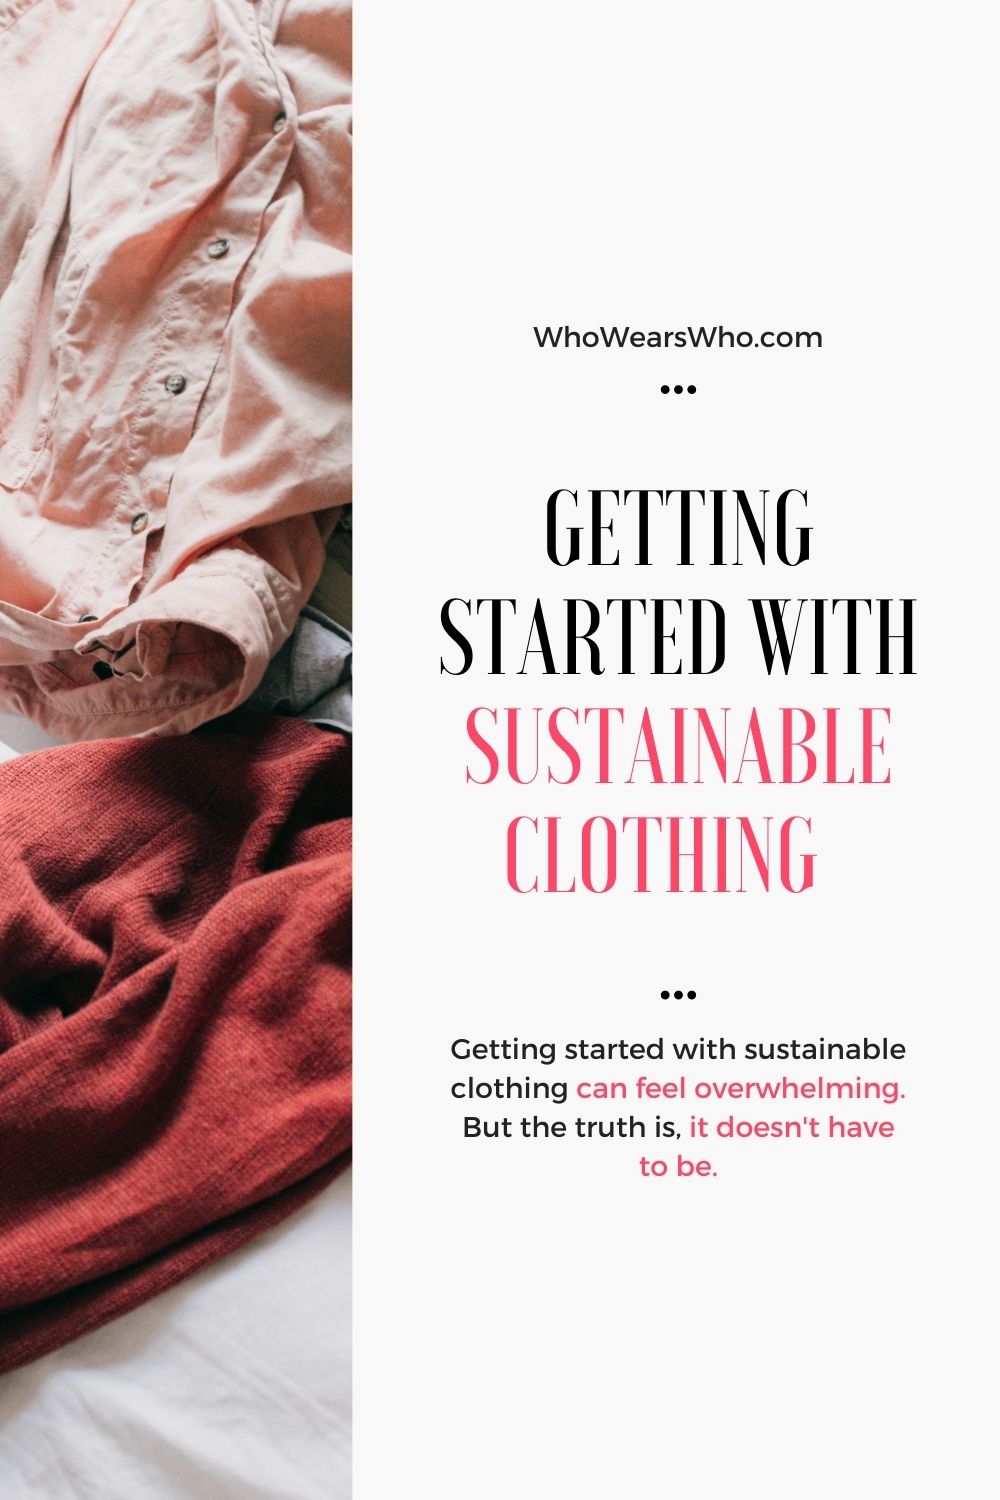 Getting started with sustainable clothing